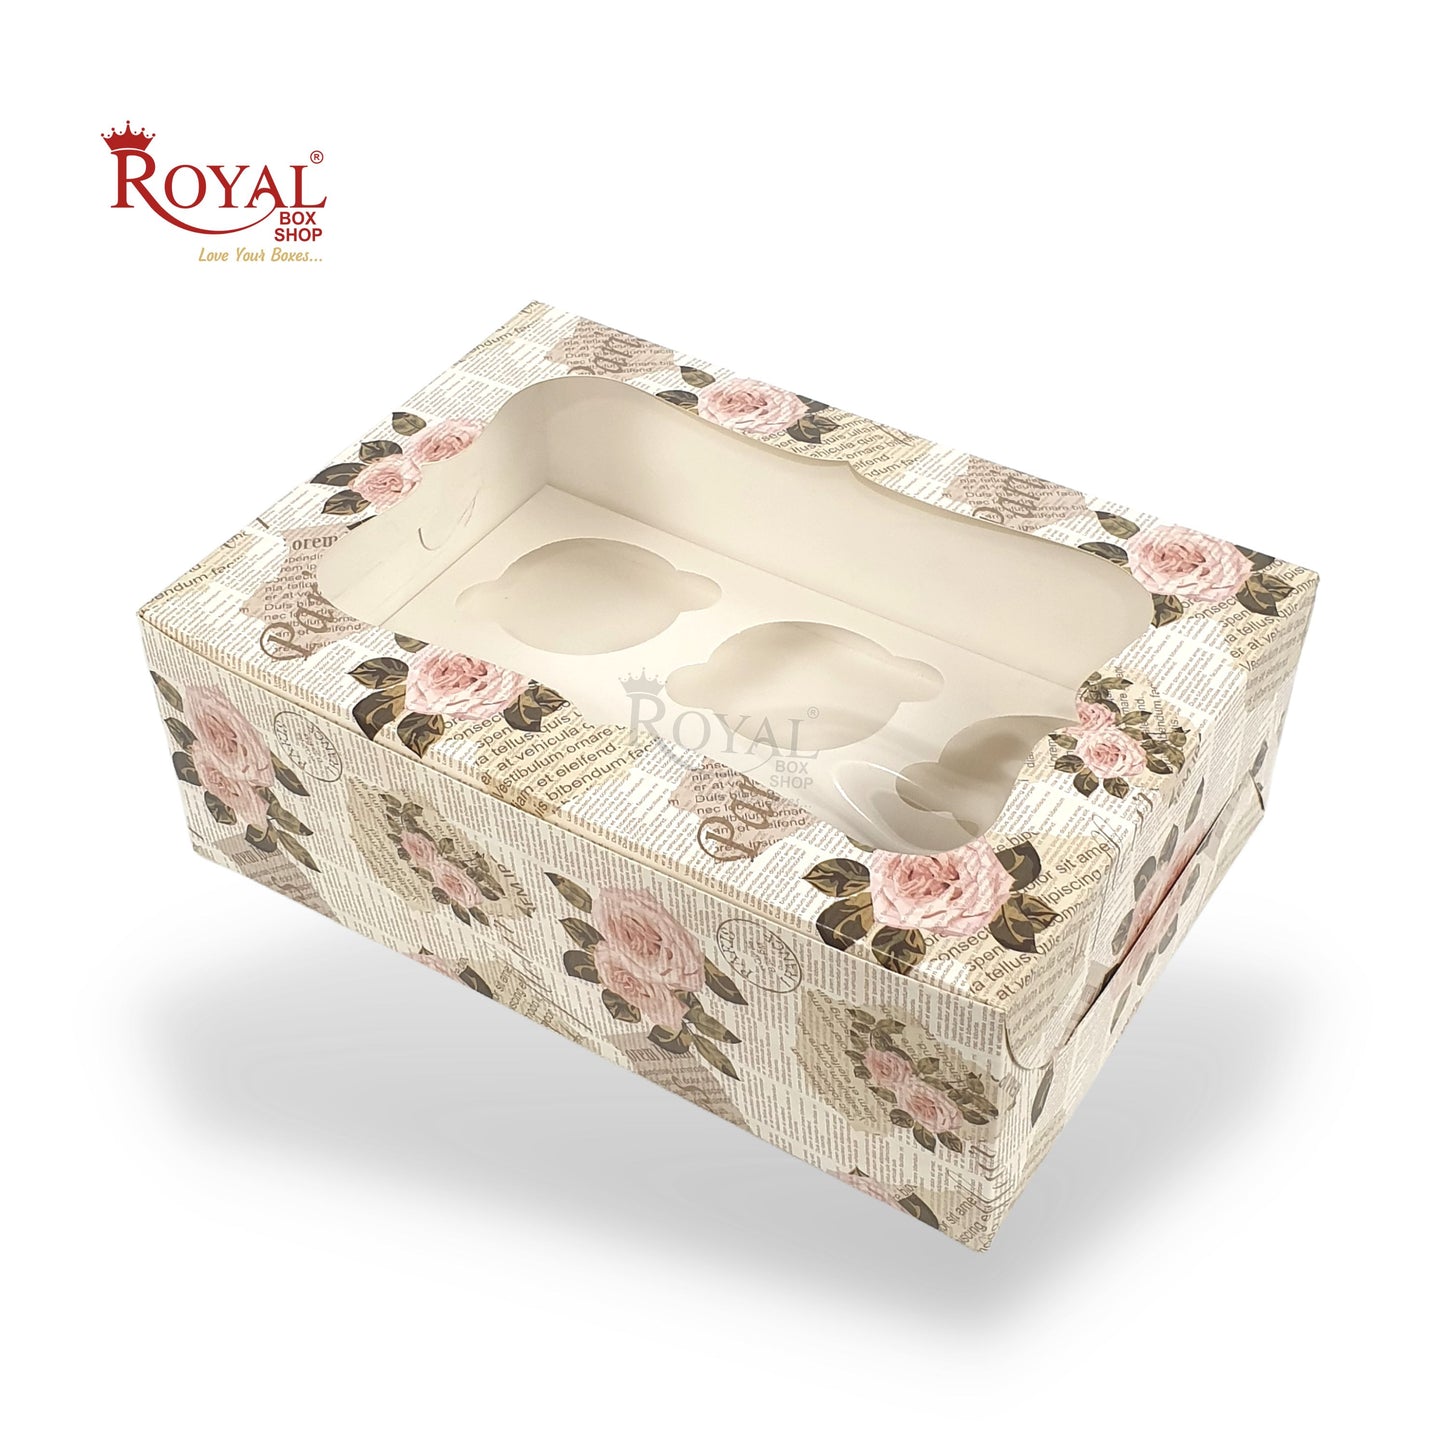 6pc Cupcake Box With Window I Size 10"x6.75"x3.5" I News Print I Perfect for Cupcakes, cookies